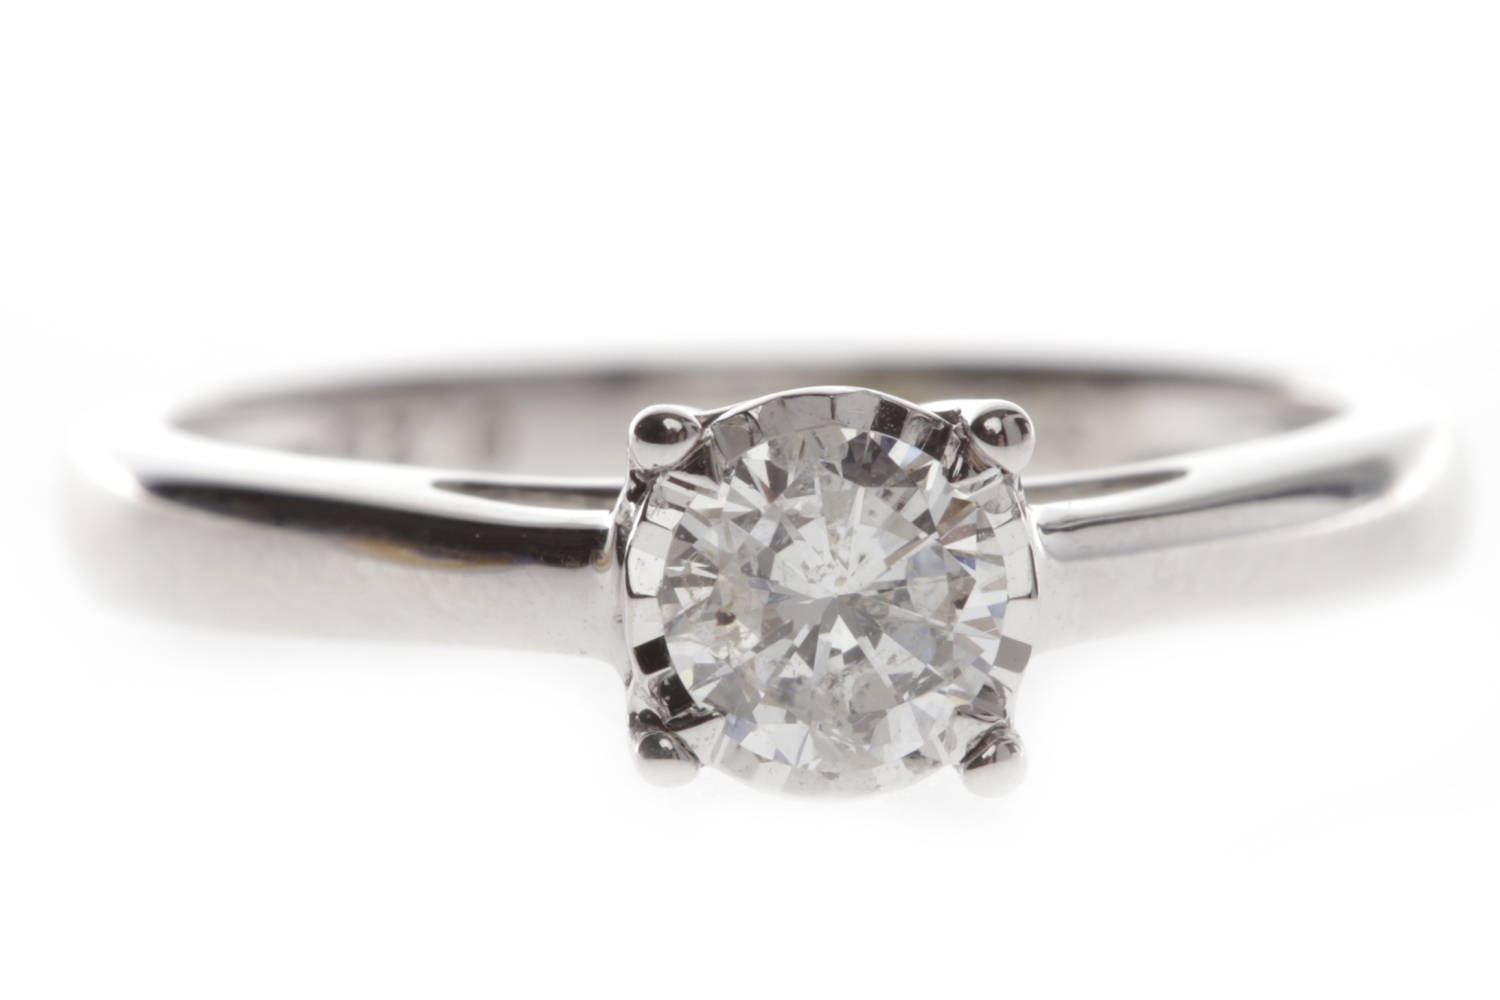 NINE CARAT WHITE GOLD DIAMOND SOLITAIRE RING with an illusion set round brilliant cut diamond of